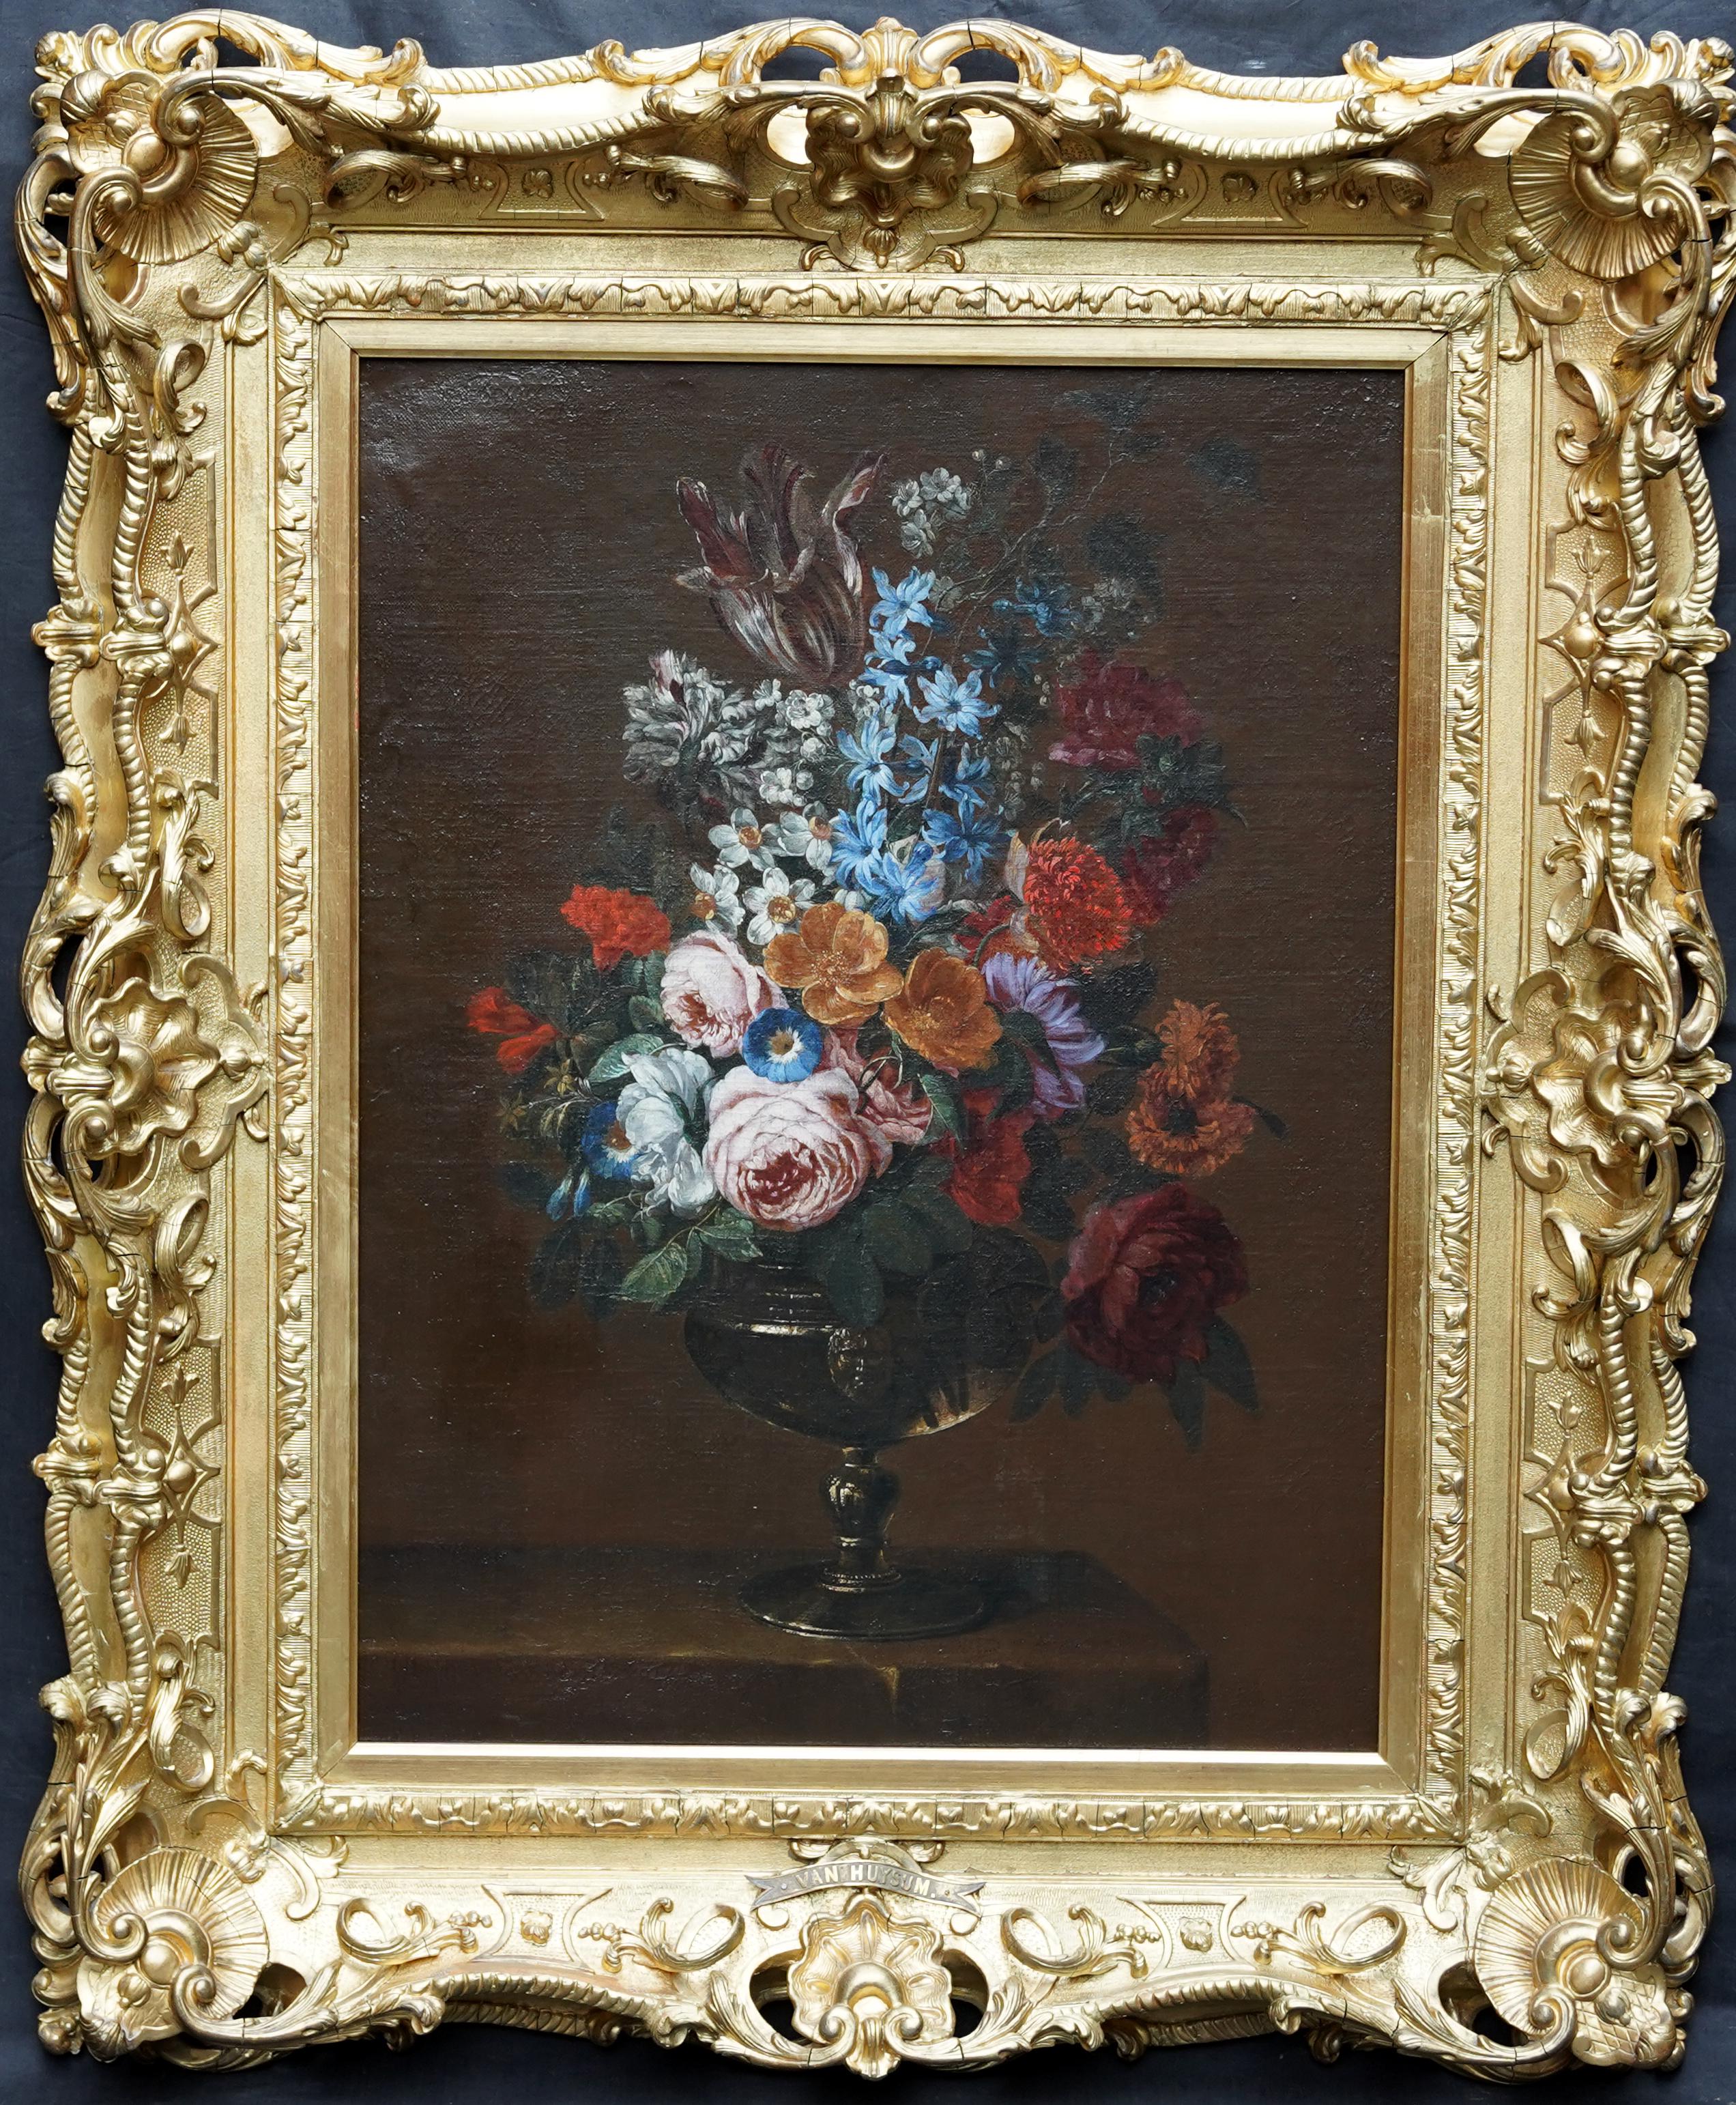 Floral Bouquet with Narcissi - Dutch Golden Age still life oil painting flowers 4